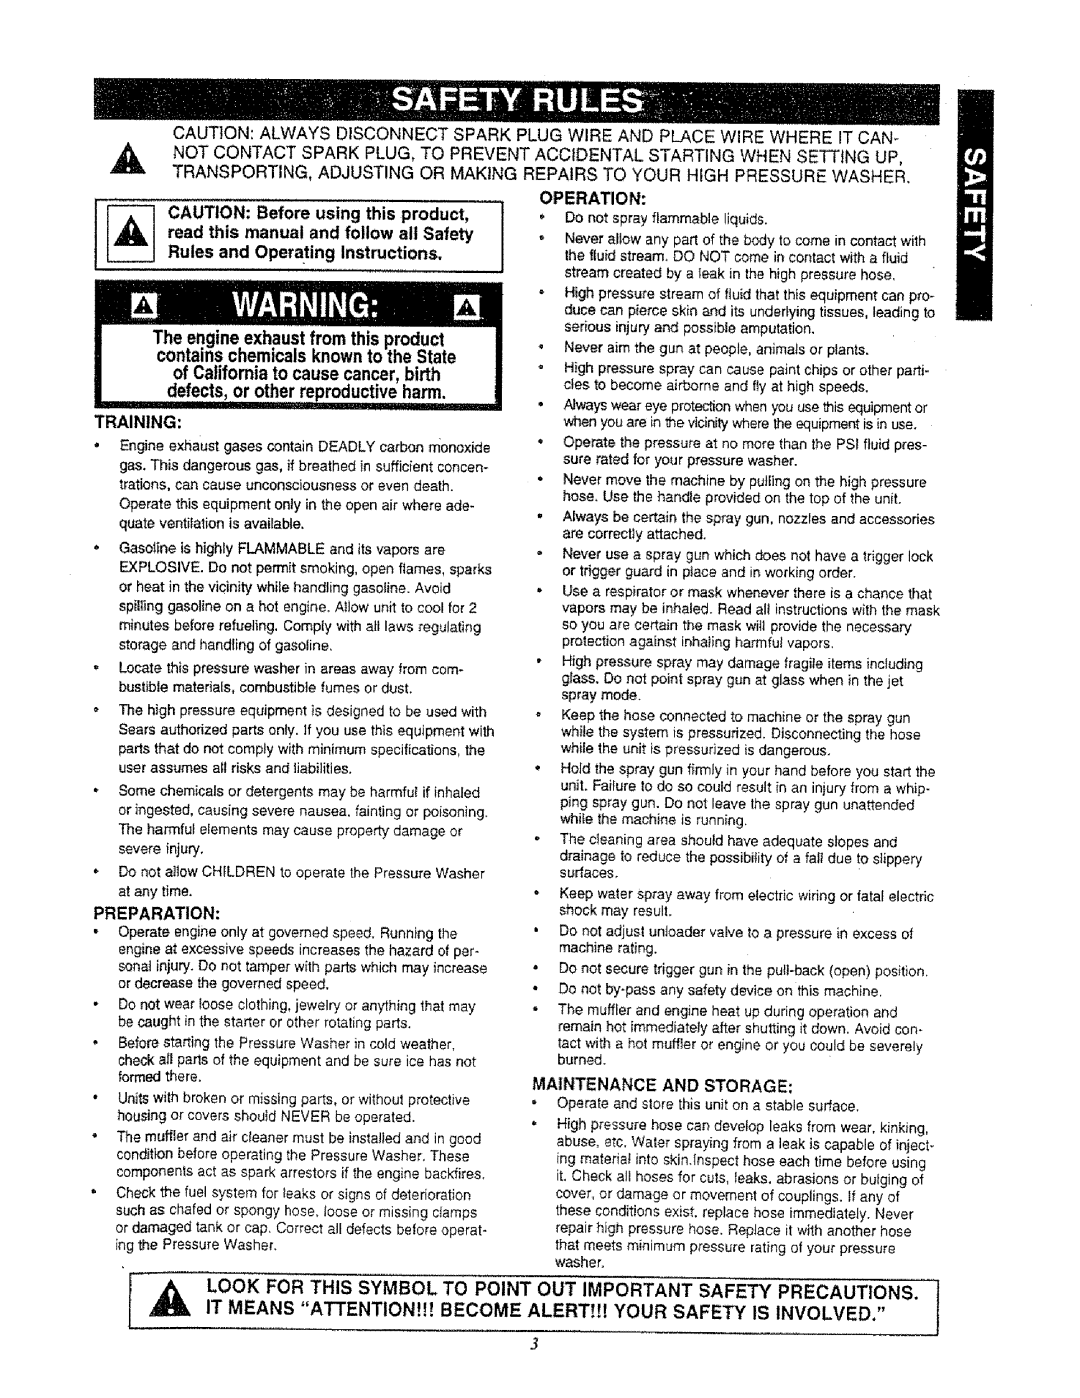 Sears 580.761652 Operation, read this manual and follow all Safety, CAUTION Before using this product, Rules and Operating 